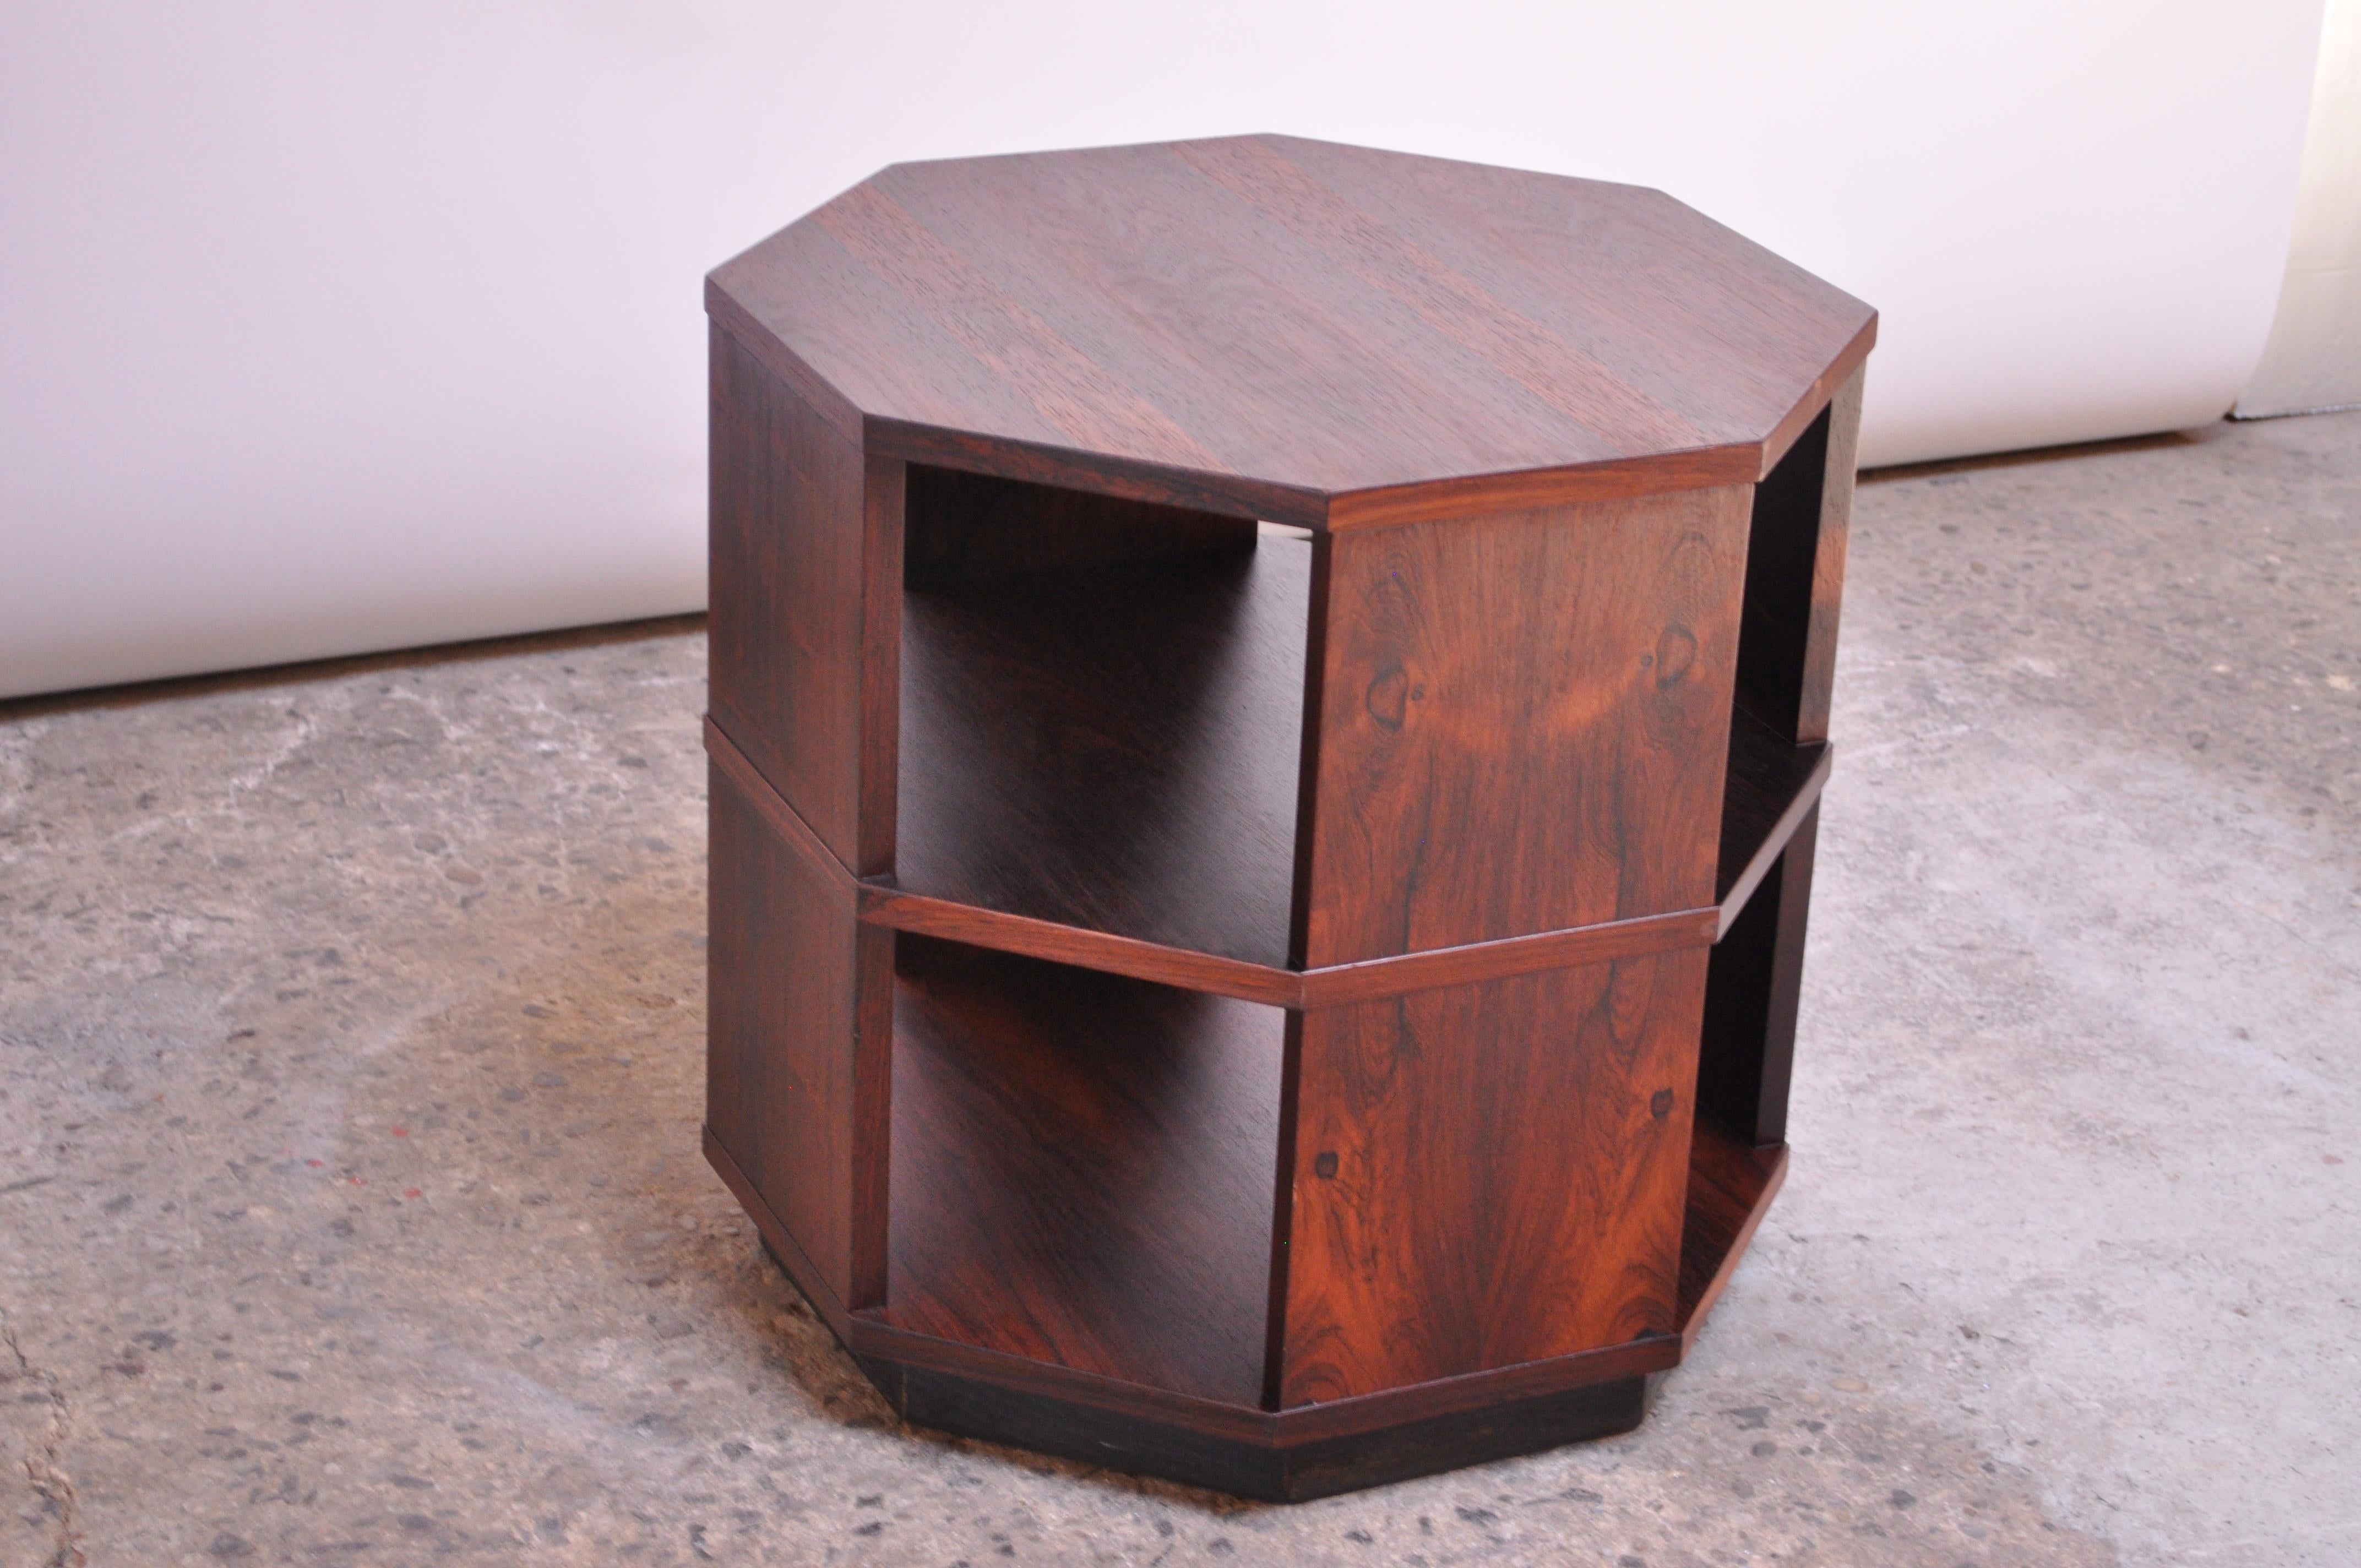 Rosewood octagon-form occasional / side table on black, plinth base. Features two tiers with four open sides; ideal for display purposes, given the exposures. Reminiscent of Harvey Probber designs, but unmarked. Likely Scandinavian circa 1960s.